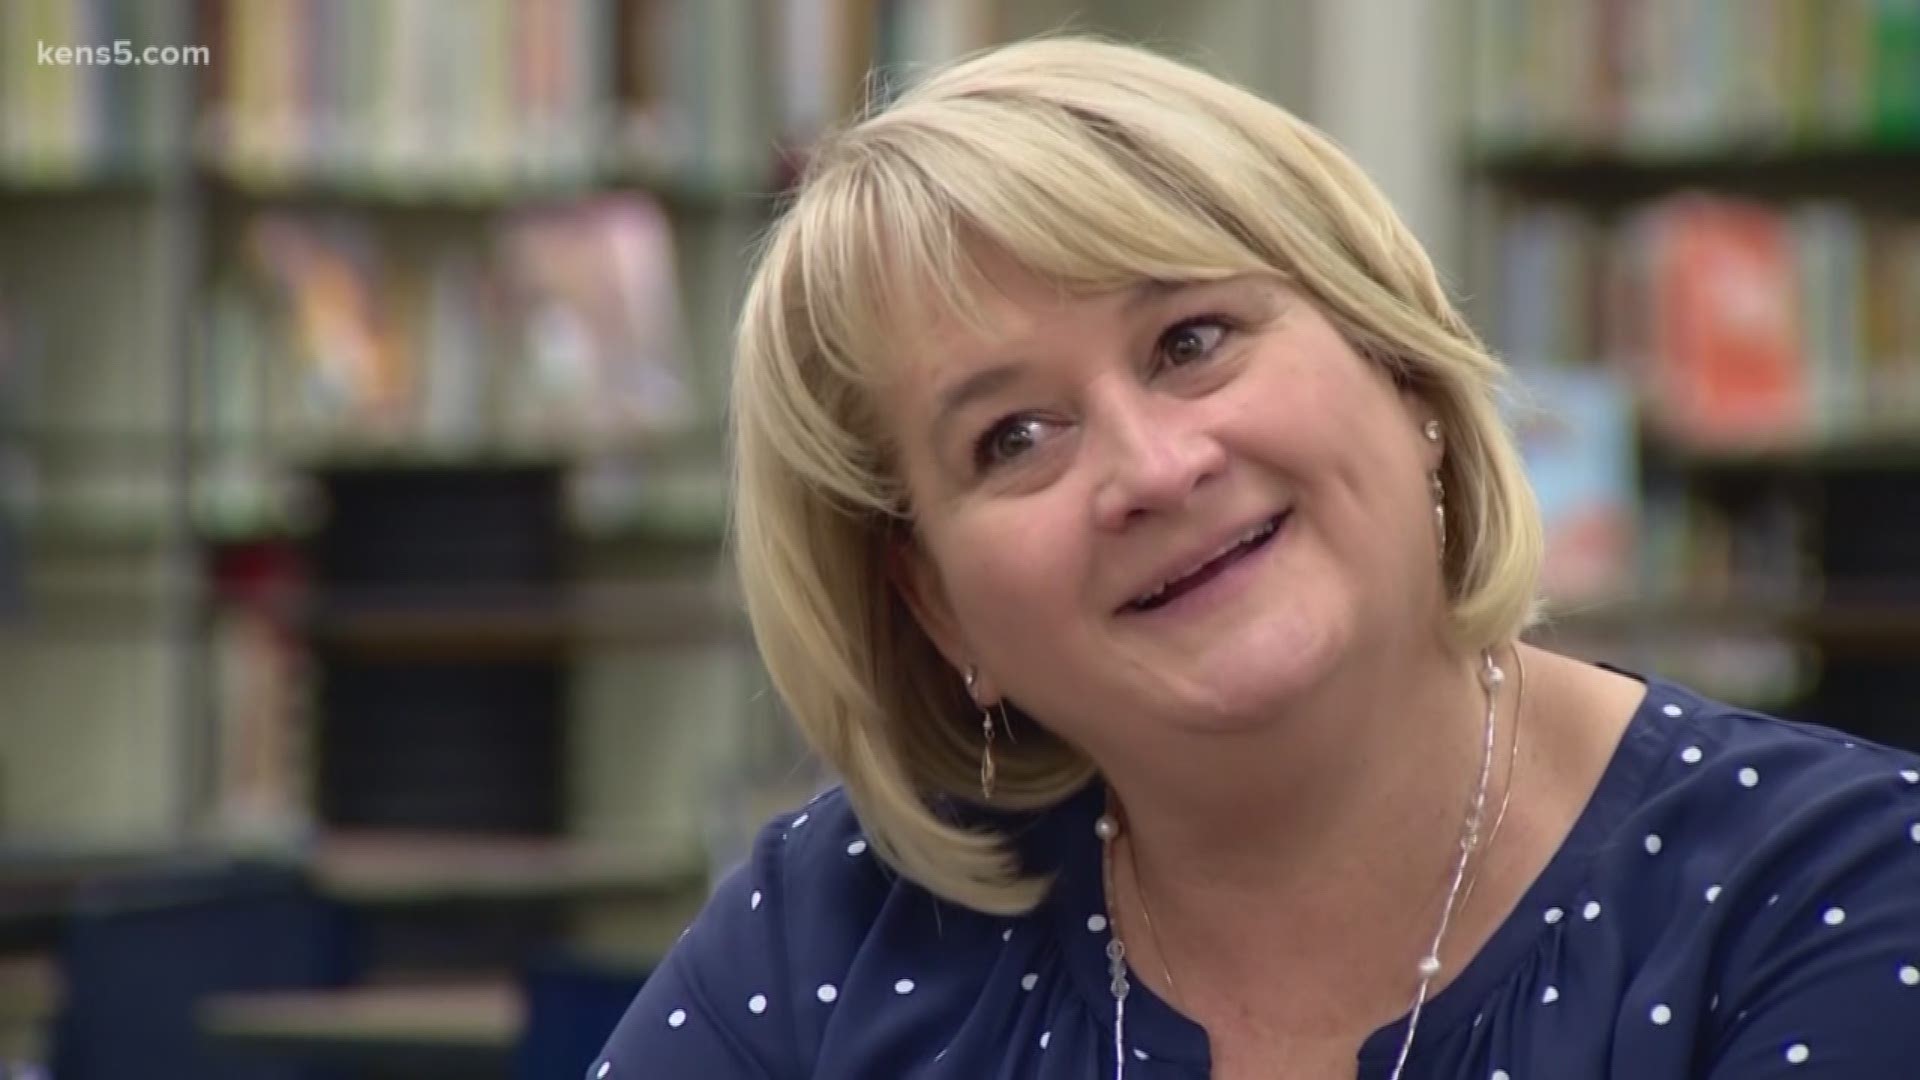 A librarian at Boerne ISD was greeted by her school's band, pep squad, and her husband as she was presented with the first Excel Award of the 2019-2020 school year.